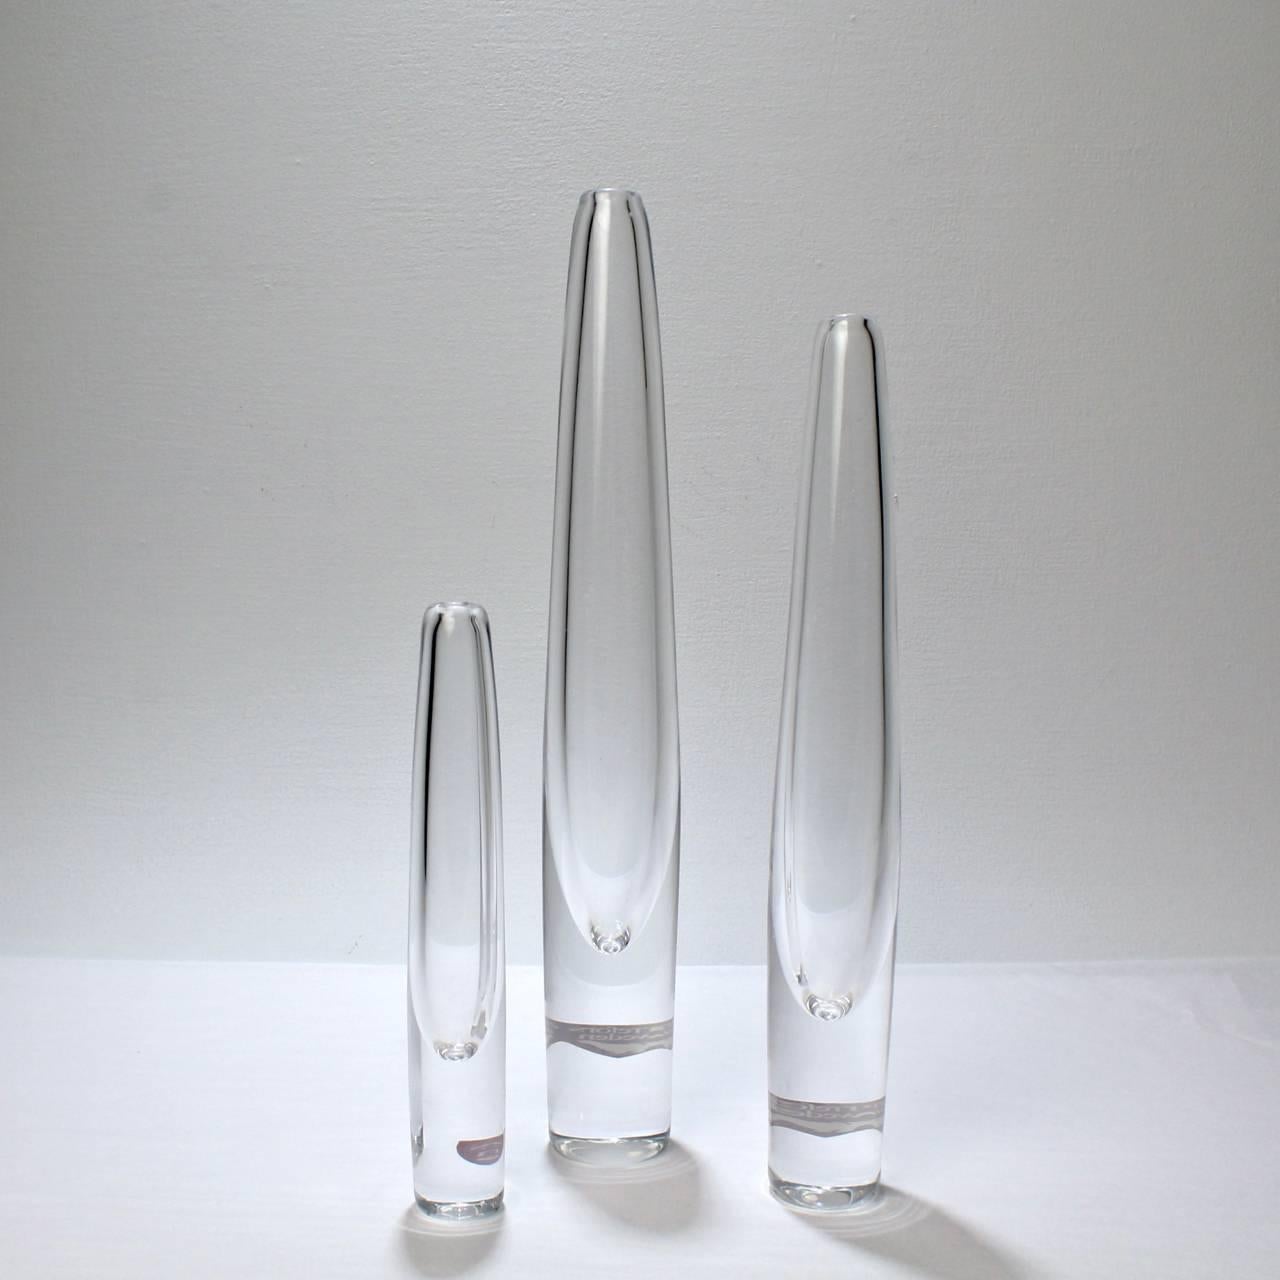 A fine group of three Orrefors Sputnik vases.

Originally designed and produced by stromberghyttan by Asta and Gerda Stromberg in mid-20th century.

Orrefors acquired stromberghyttan in the 1976 and promptly reissued this iconic design. 

Each